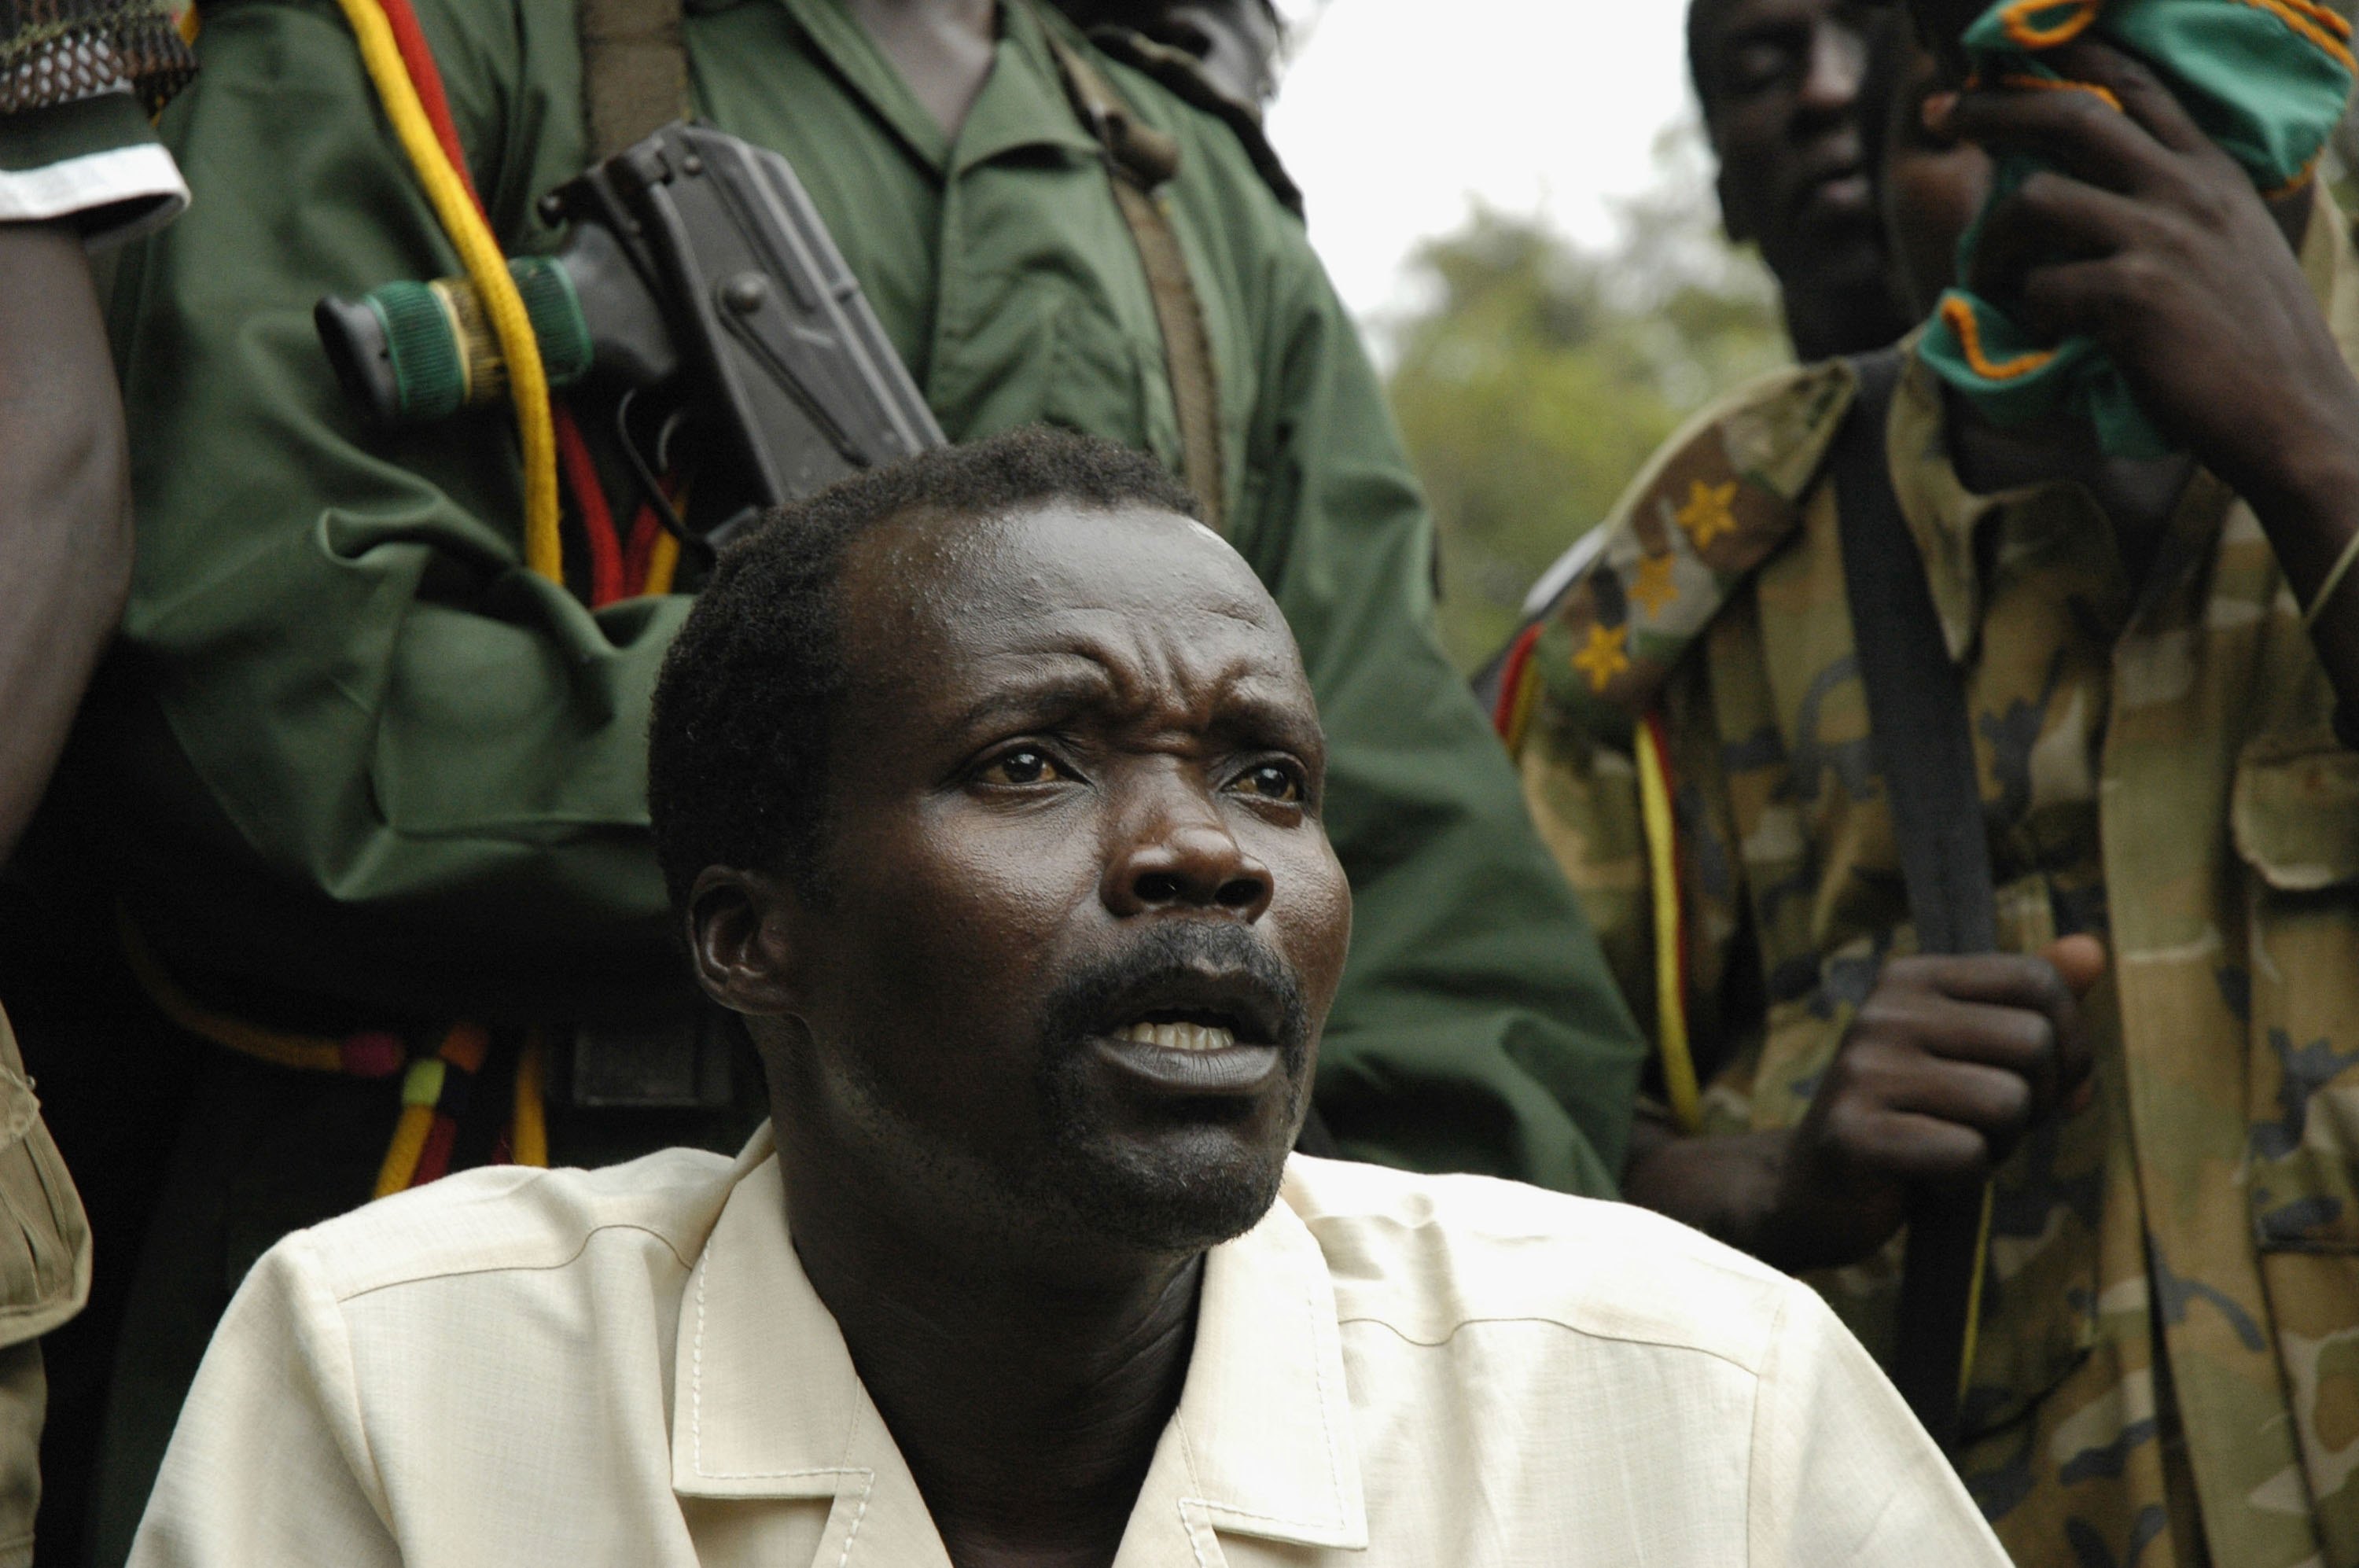 Joseph Kony, leader of the rebel group the Lord's Resistance Army makes a rare statement to the media during peace talks on Aug. 1, 2006 on the Congo-Sudan Border.